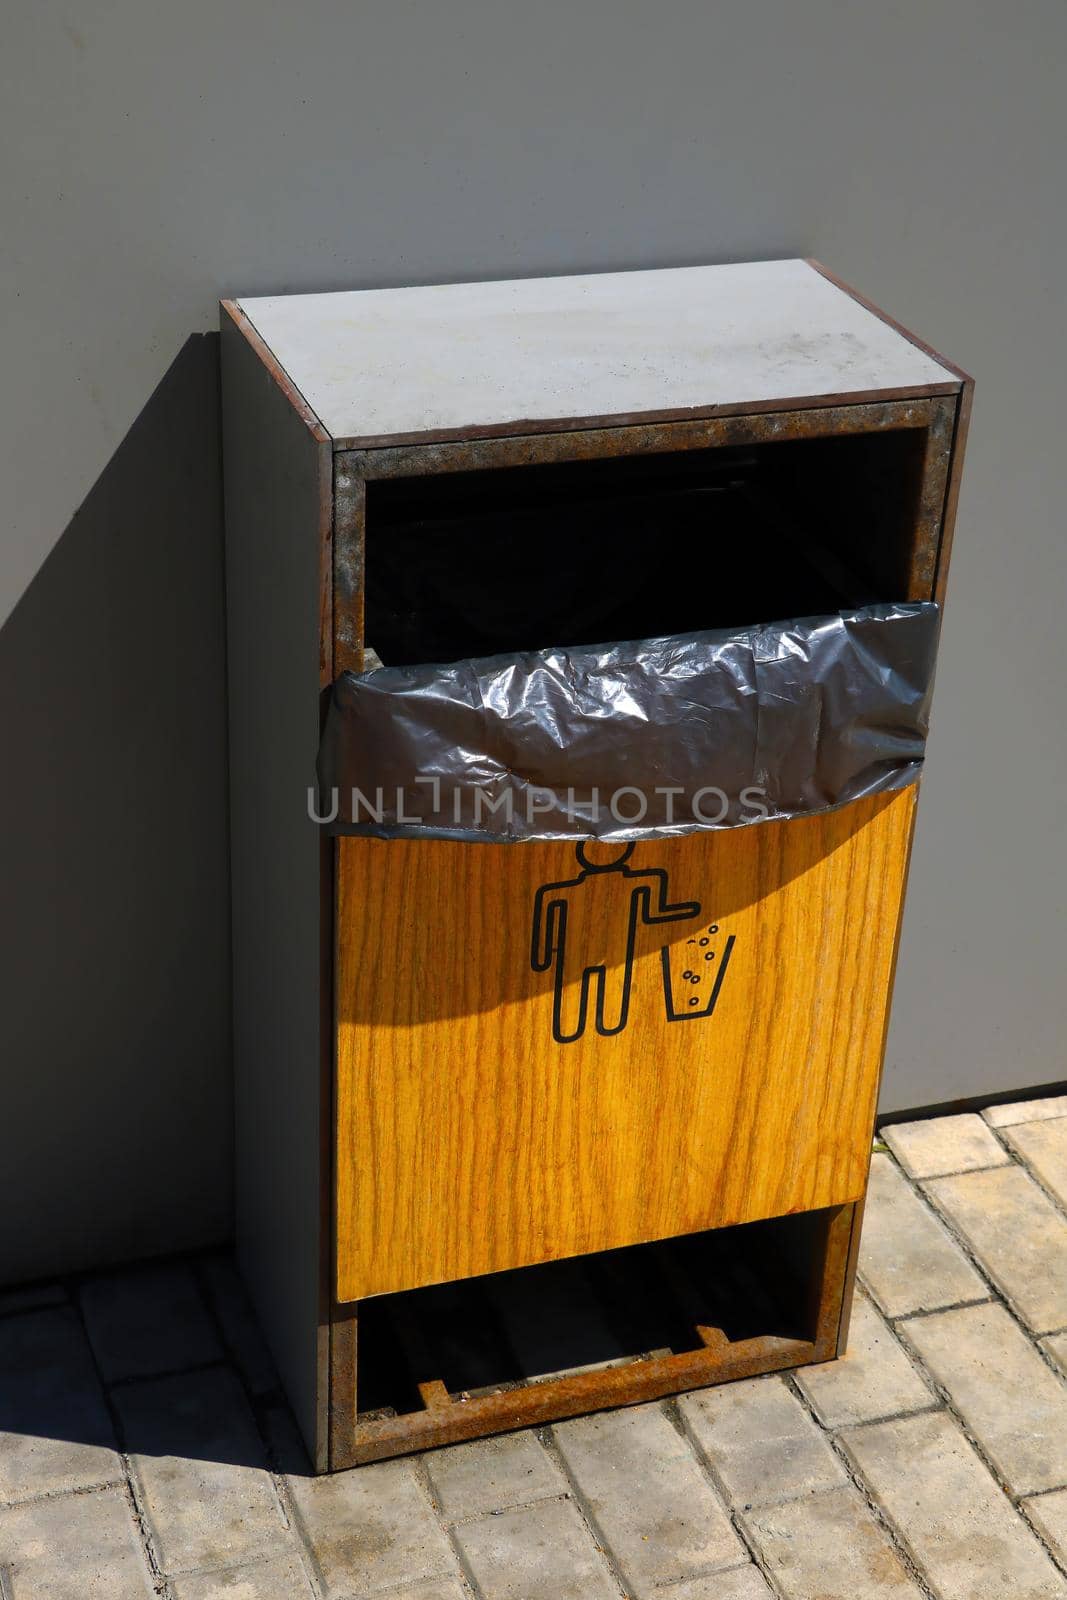 A beautiful modern trash can in a residential complex